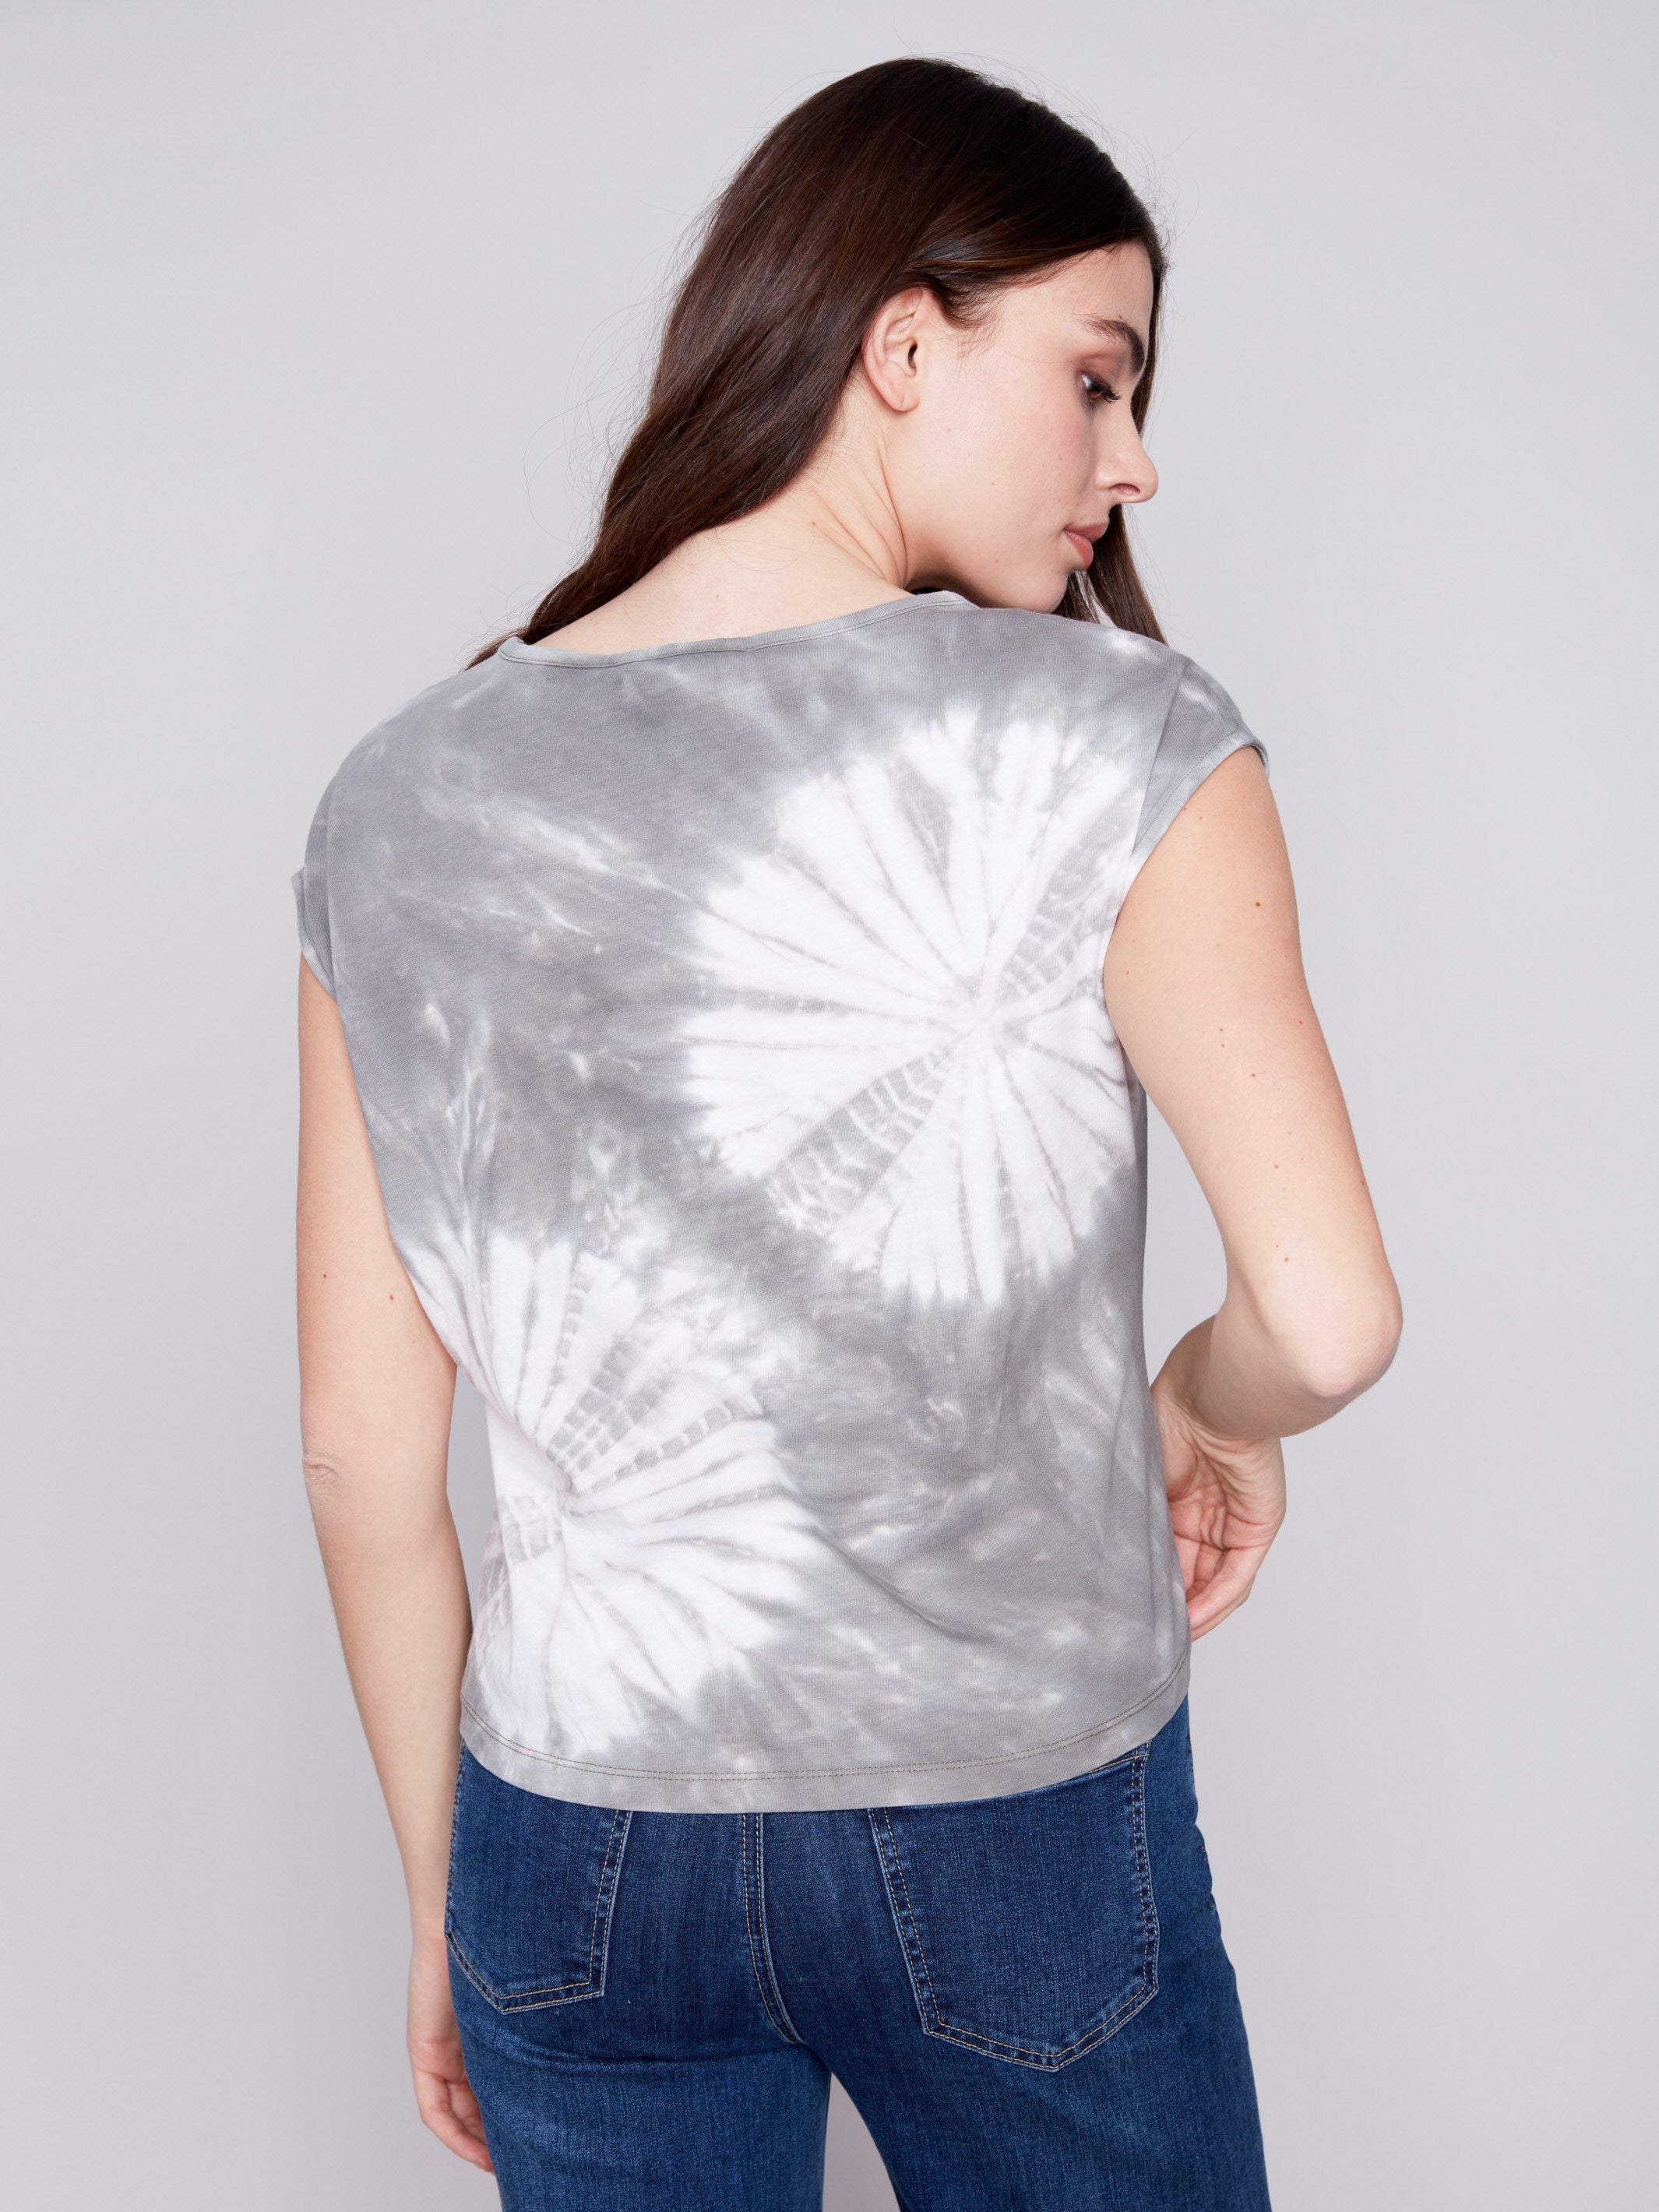 Printed Sleeveless Front Knot Top - Celadon - Charlie B Collection Canada - Image 2